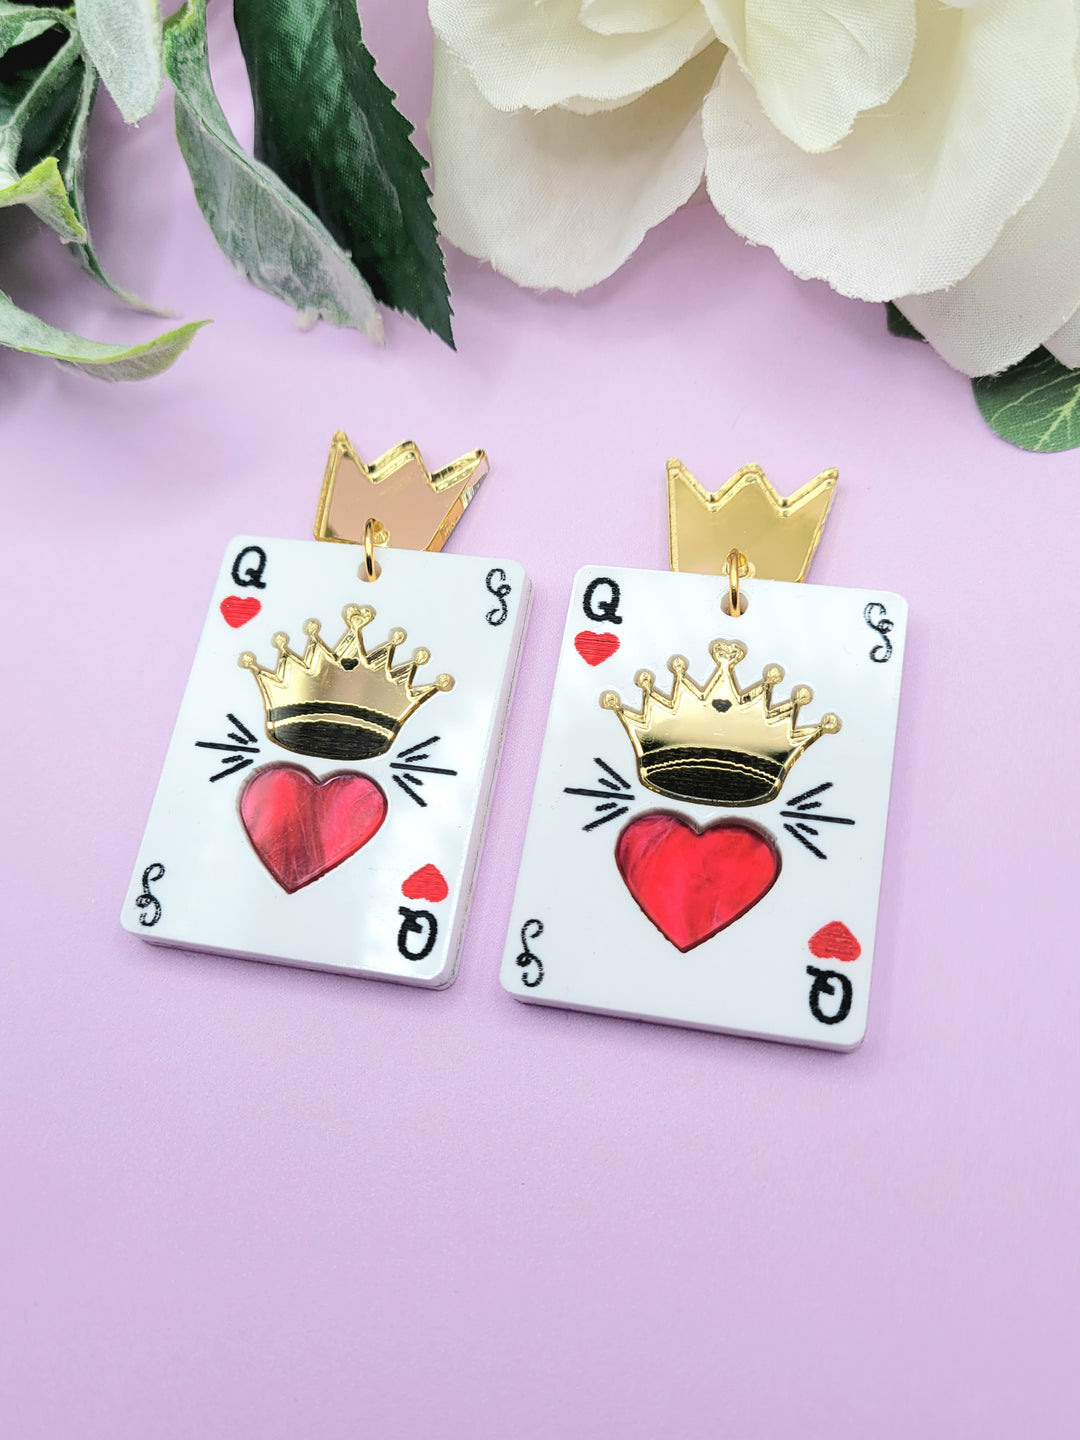 Queen of Hearts Playing Card Earrings